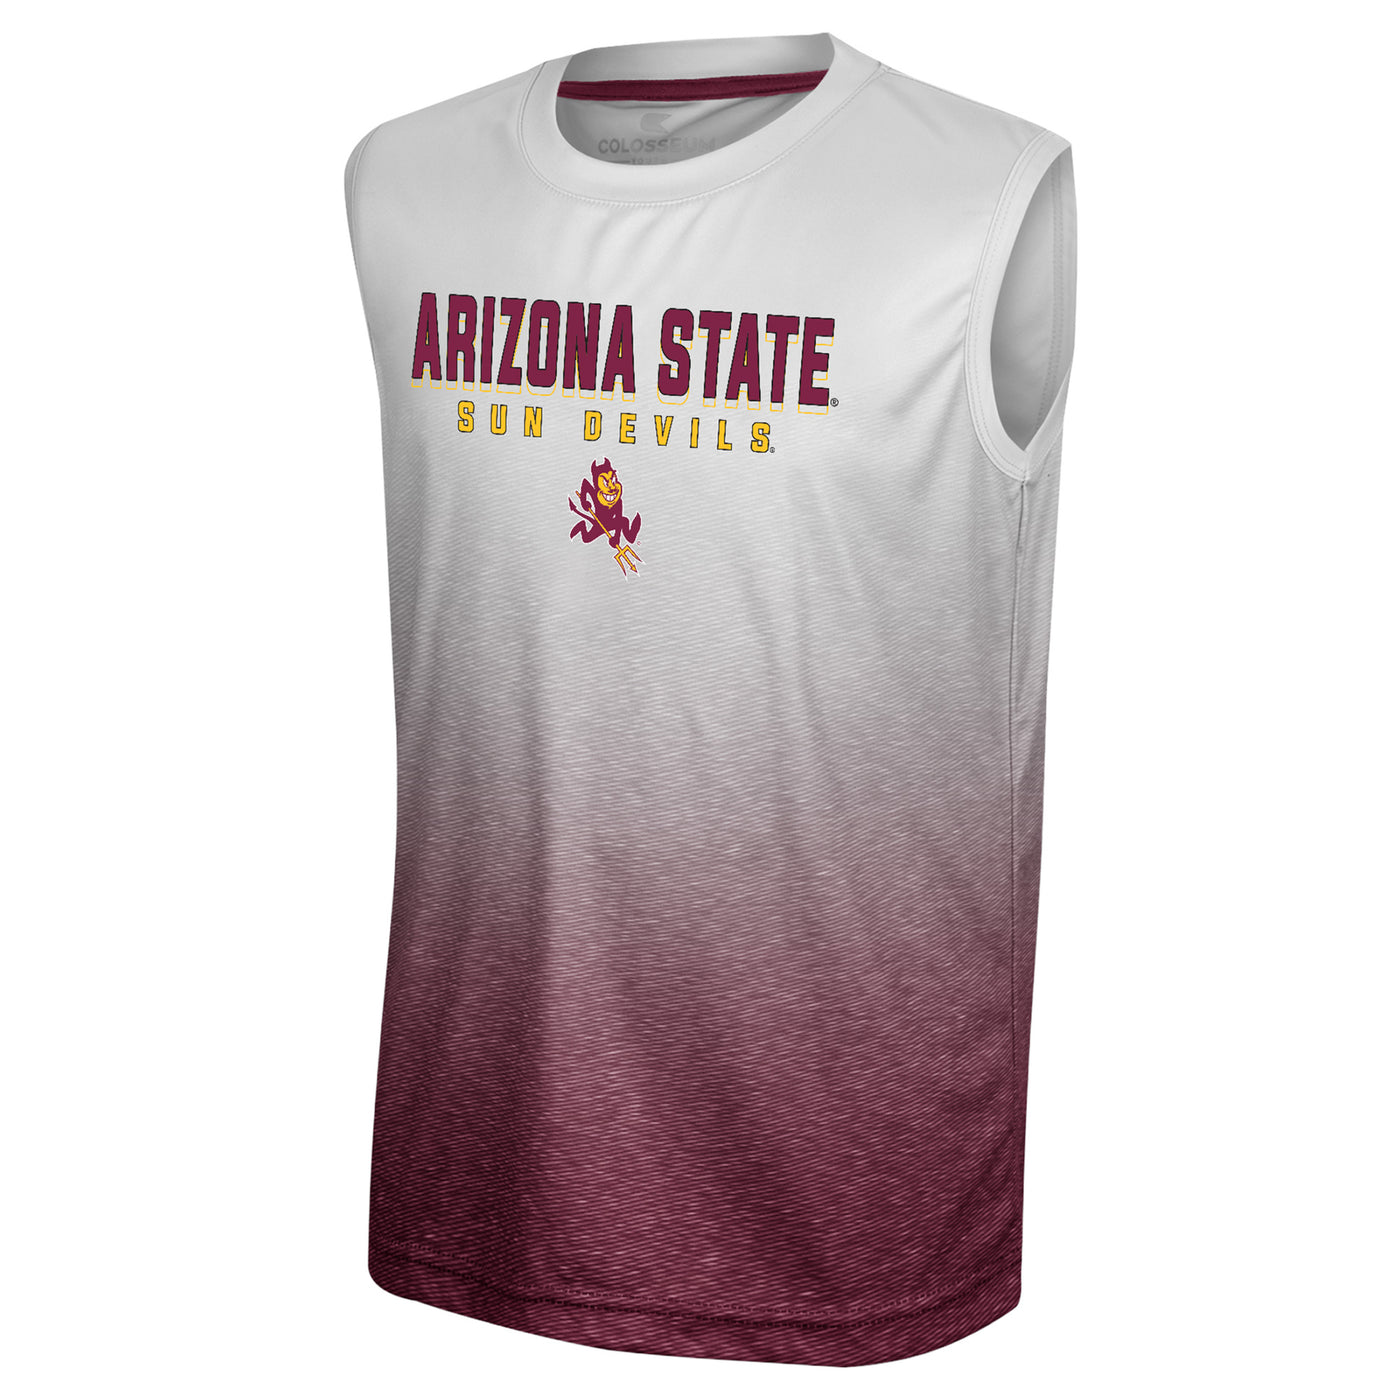 ASU youth sleeveless tee with a white to maroon fade pattern and 'Arizona State Sun Devils' and Sparky below